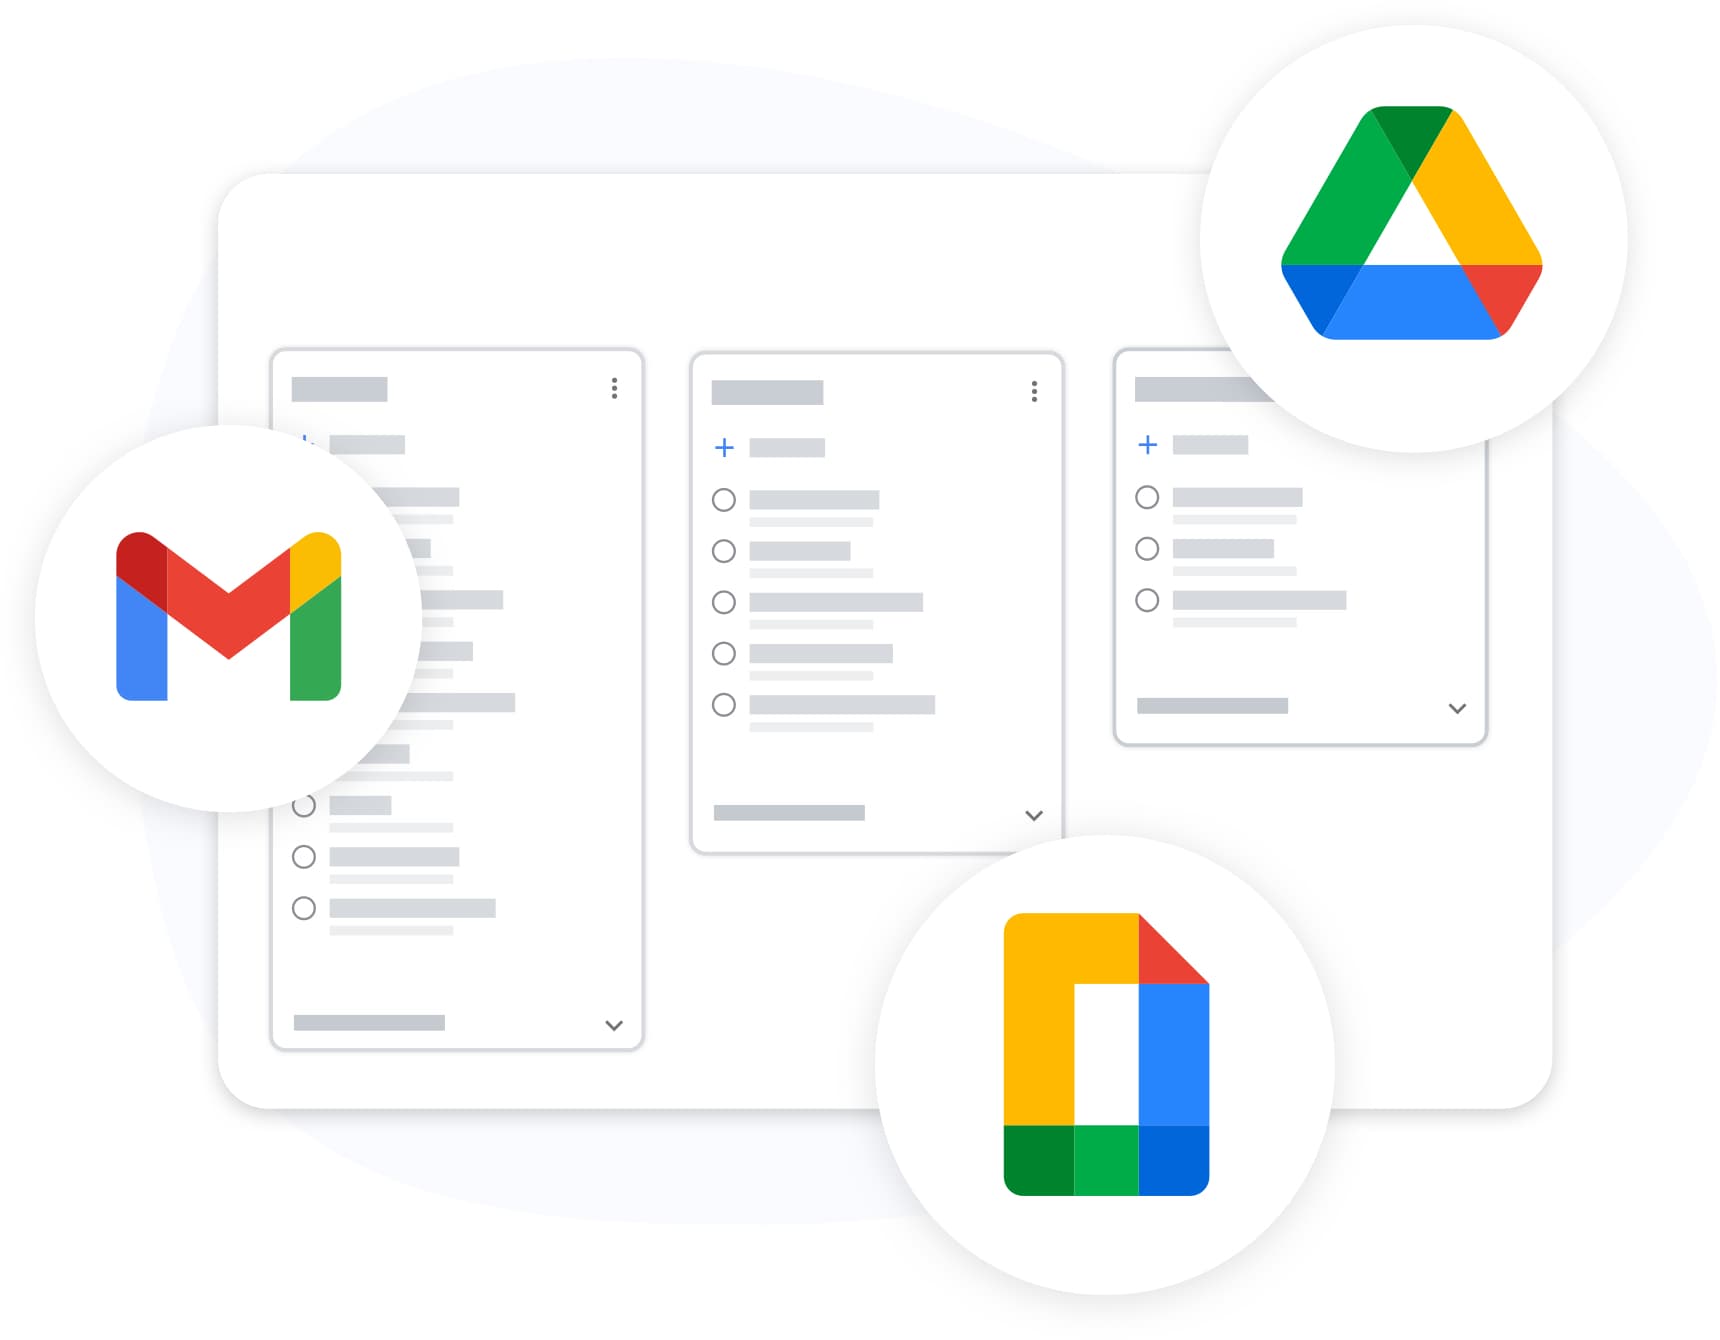 Attach Google Drive documents to Google Tasks and export to Google Sheets